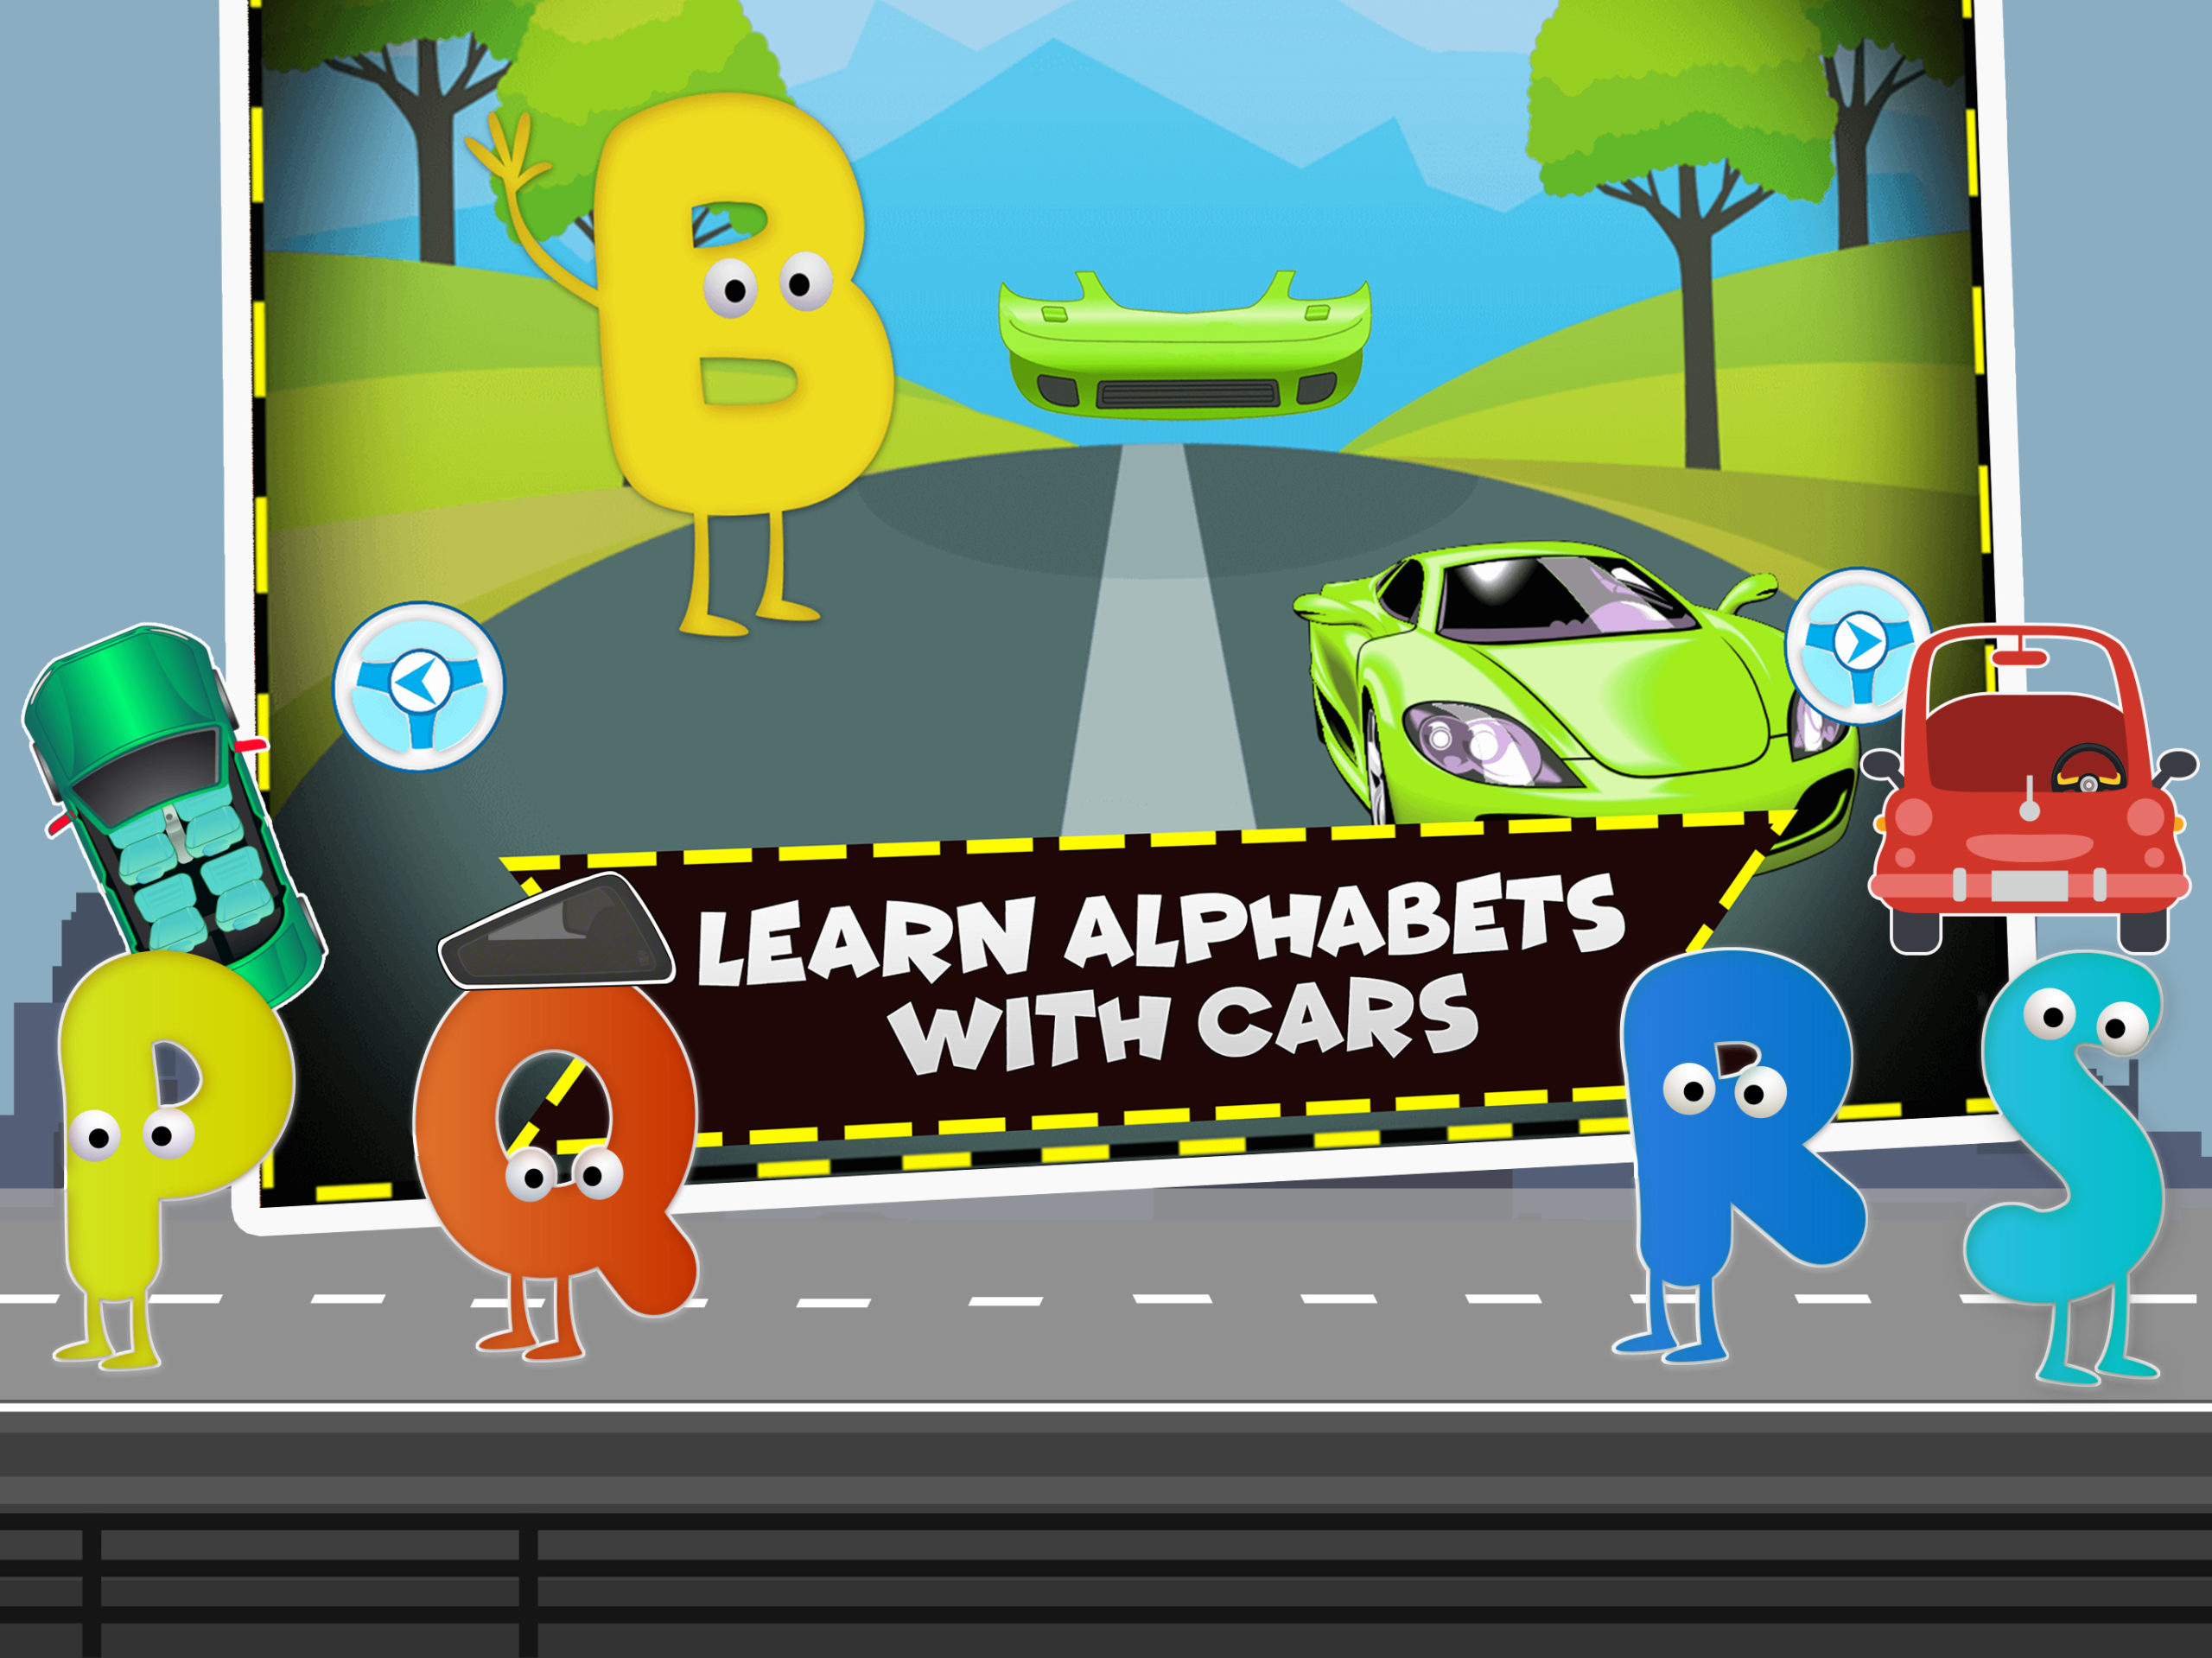 learning alphabets with cars